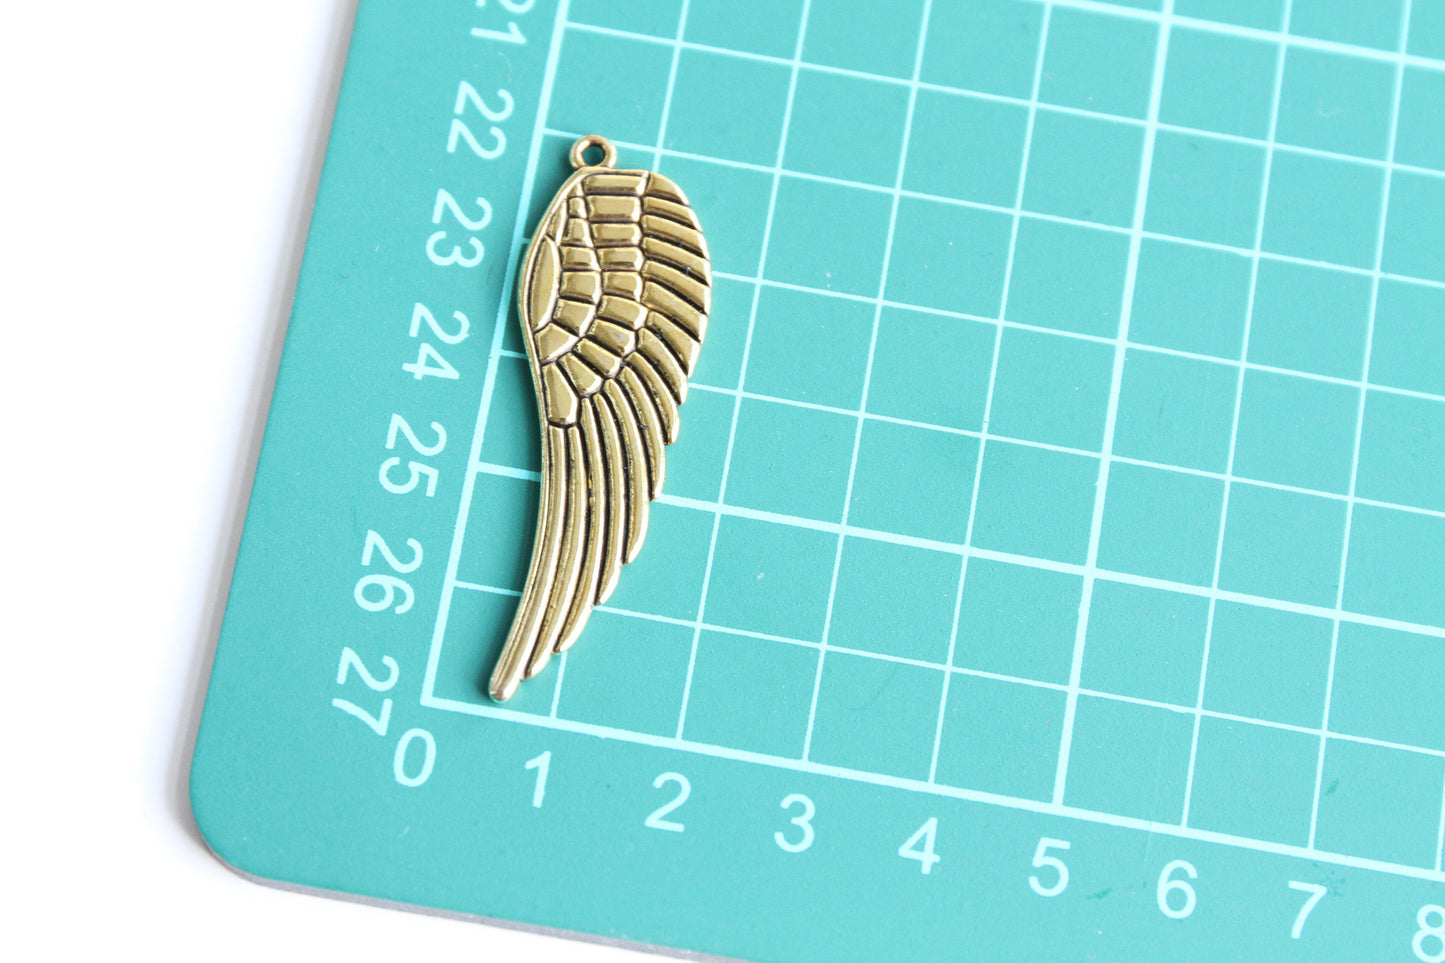 Charm - Feather Wing, Antique Gold - KEY Handmade
 - 3